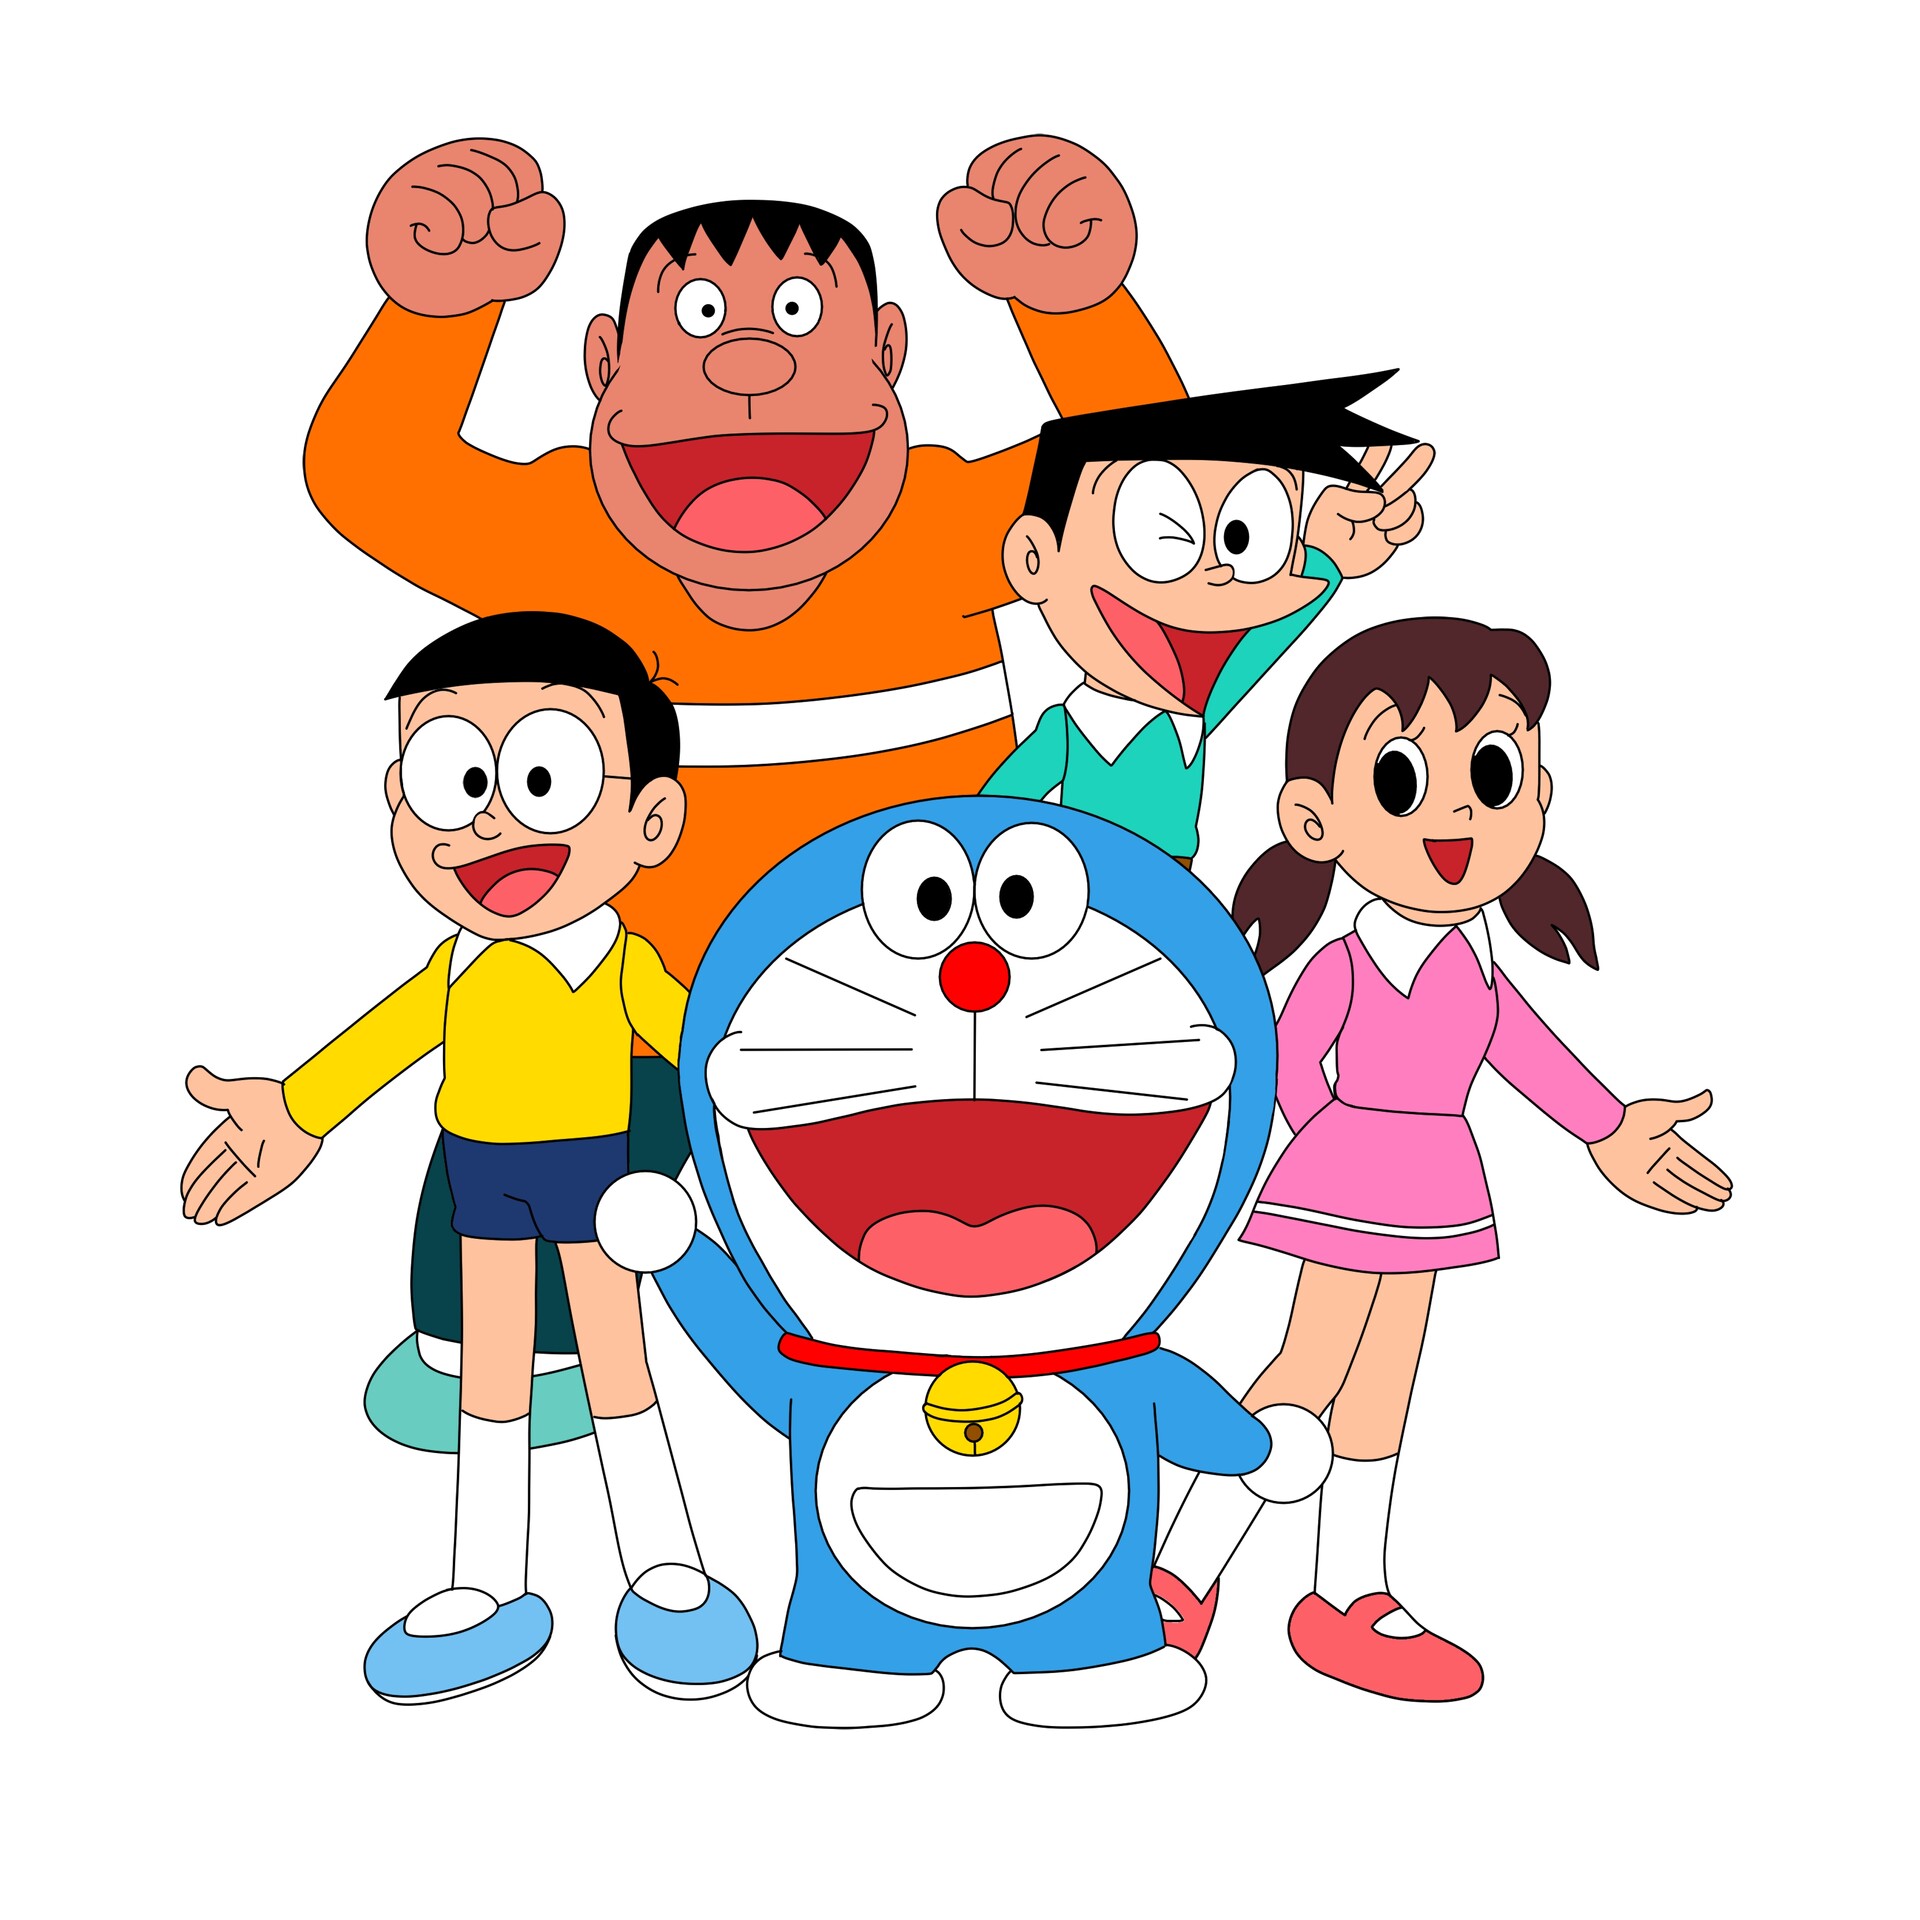 How to draw Doraemon and his Friends || Step by step || - YouTube